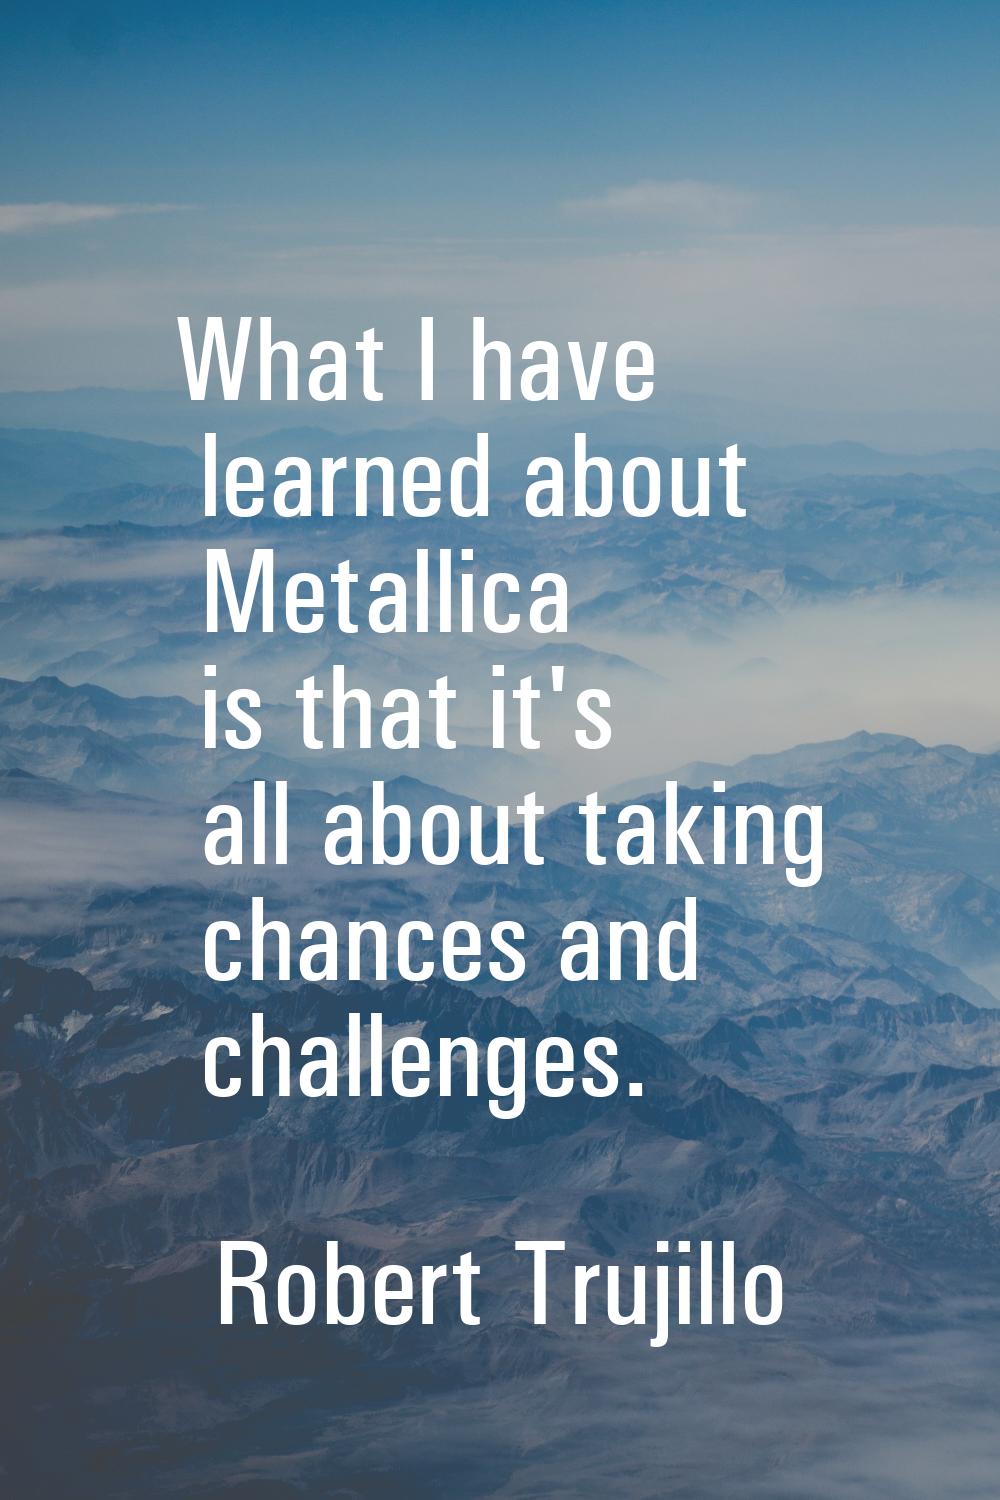 What I have learned about Metallica is that it's all about taking chances and challenges.